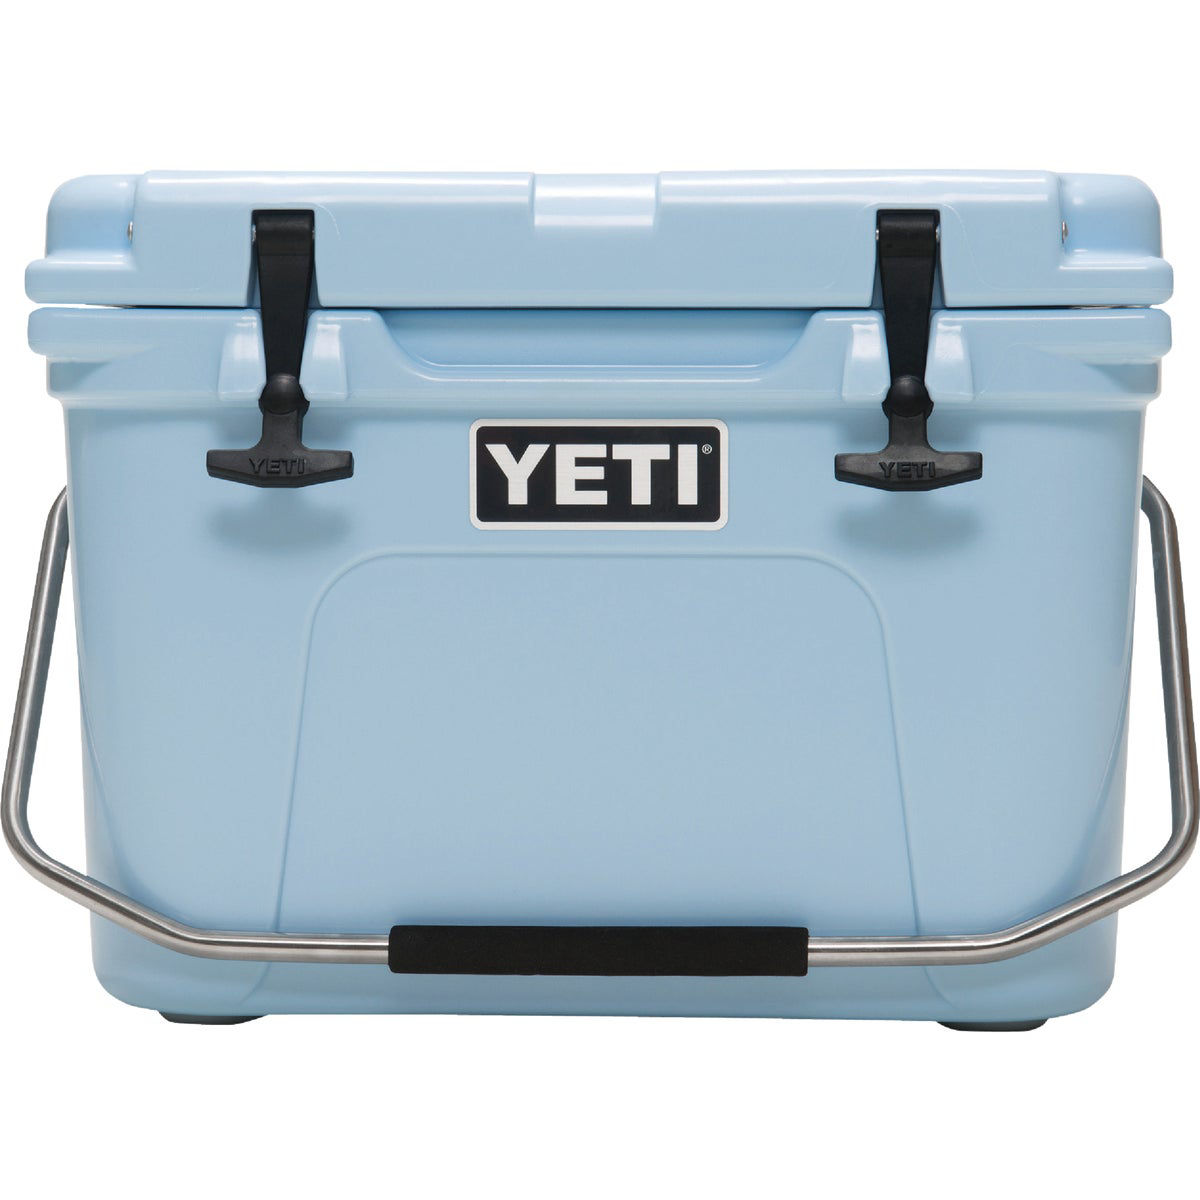 Yeti Roadie 20, 16-Can Cooler, Blue | Do it Best